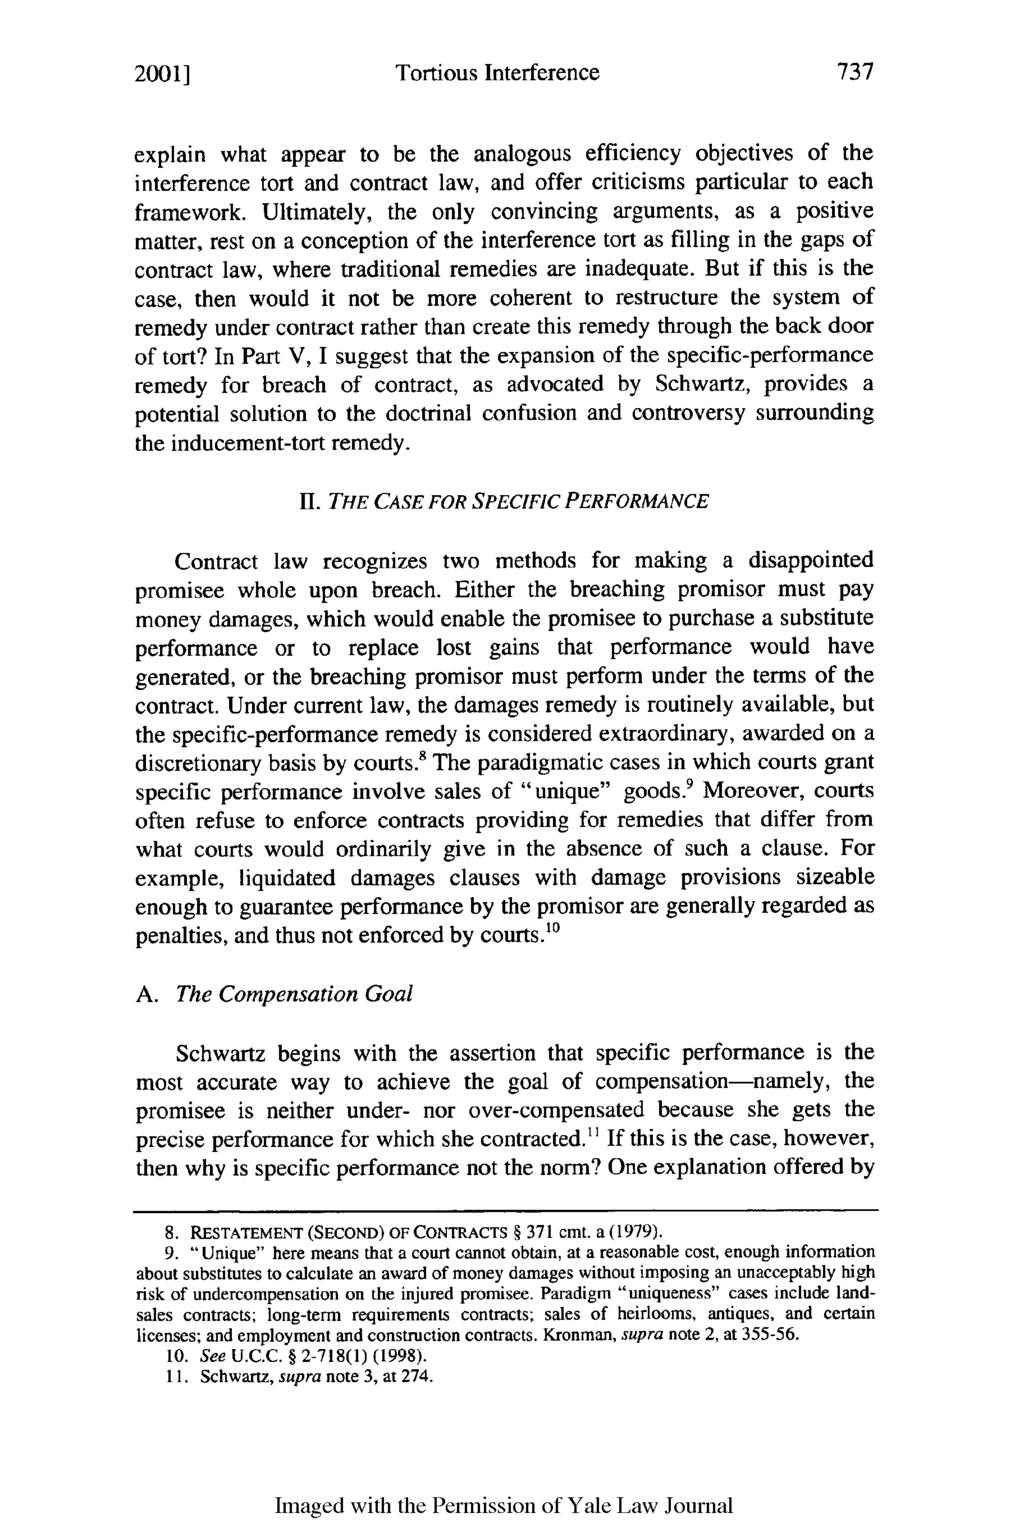 2001] Tortious Interference explain what appear to be the analogous efficiency objectives of the interference tort and contract law, and offer criticisms particular to each framework.